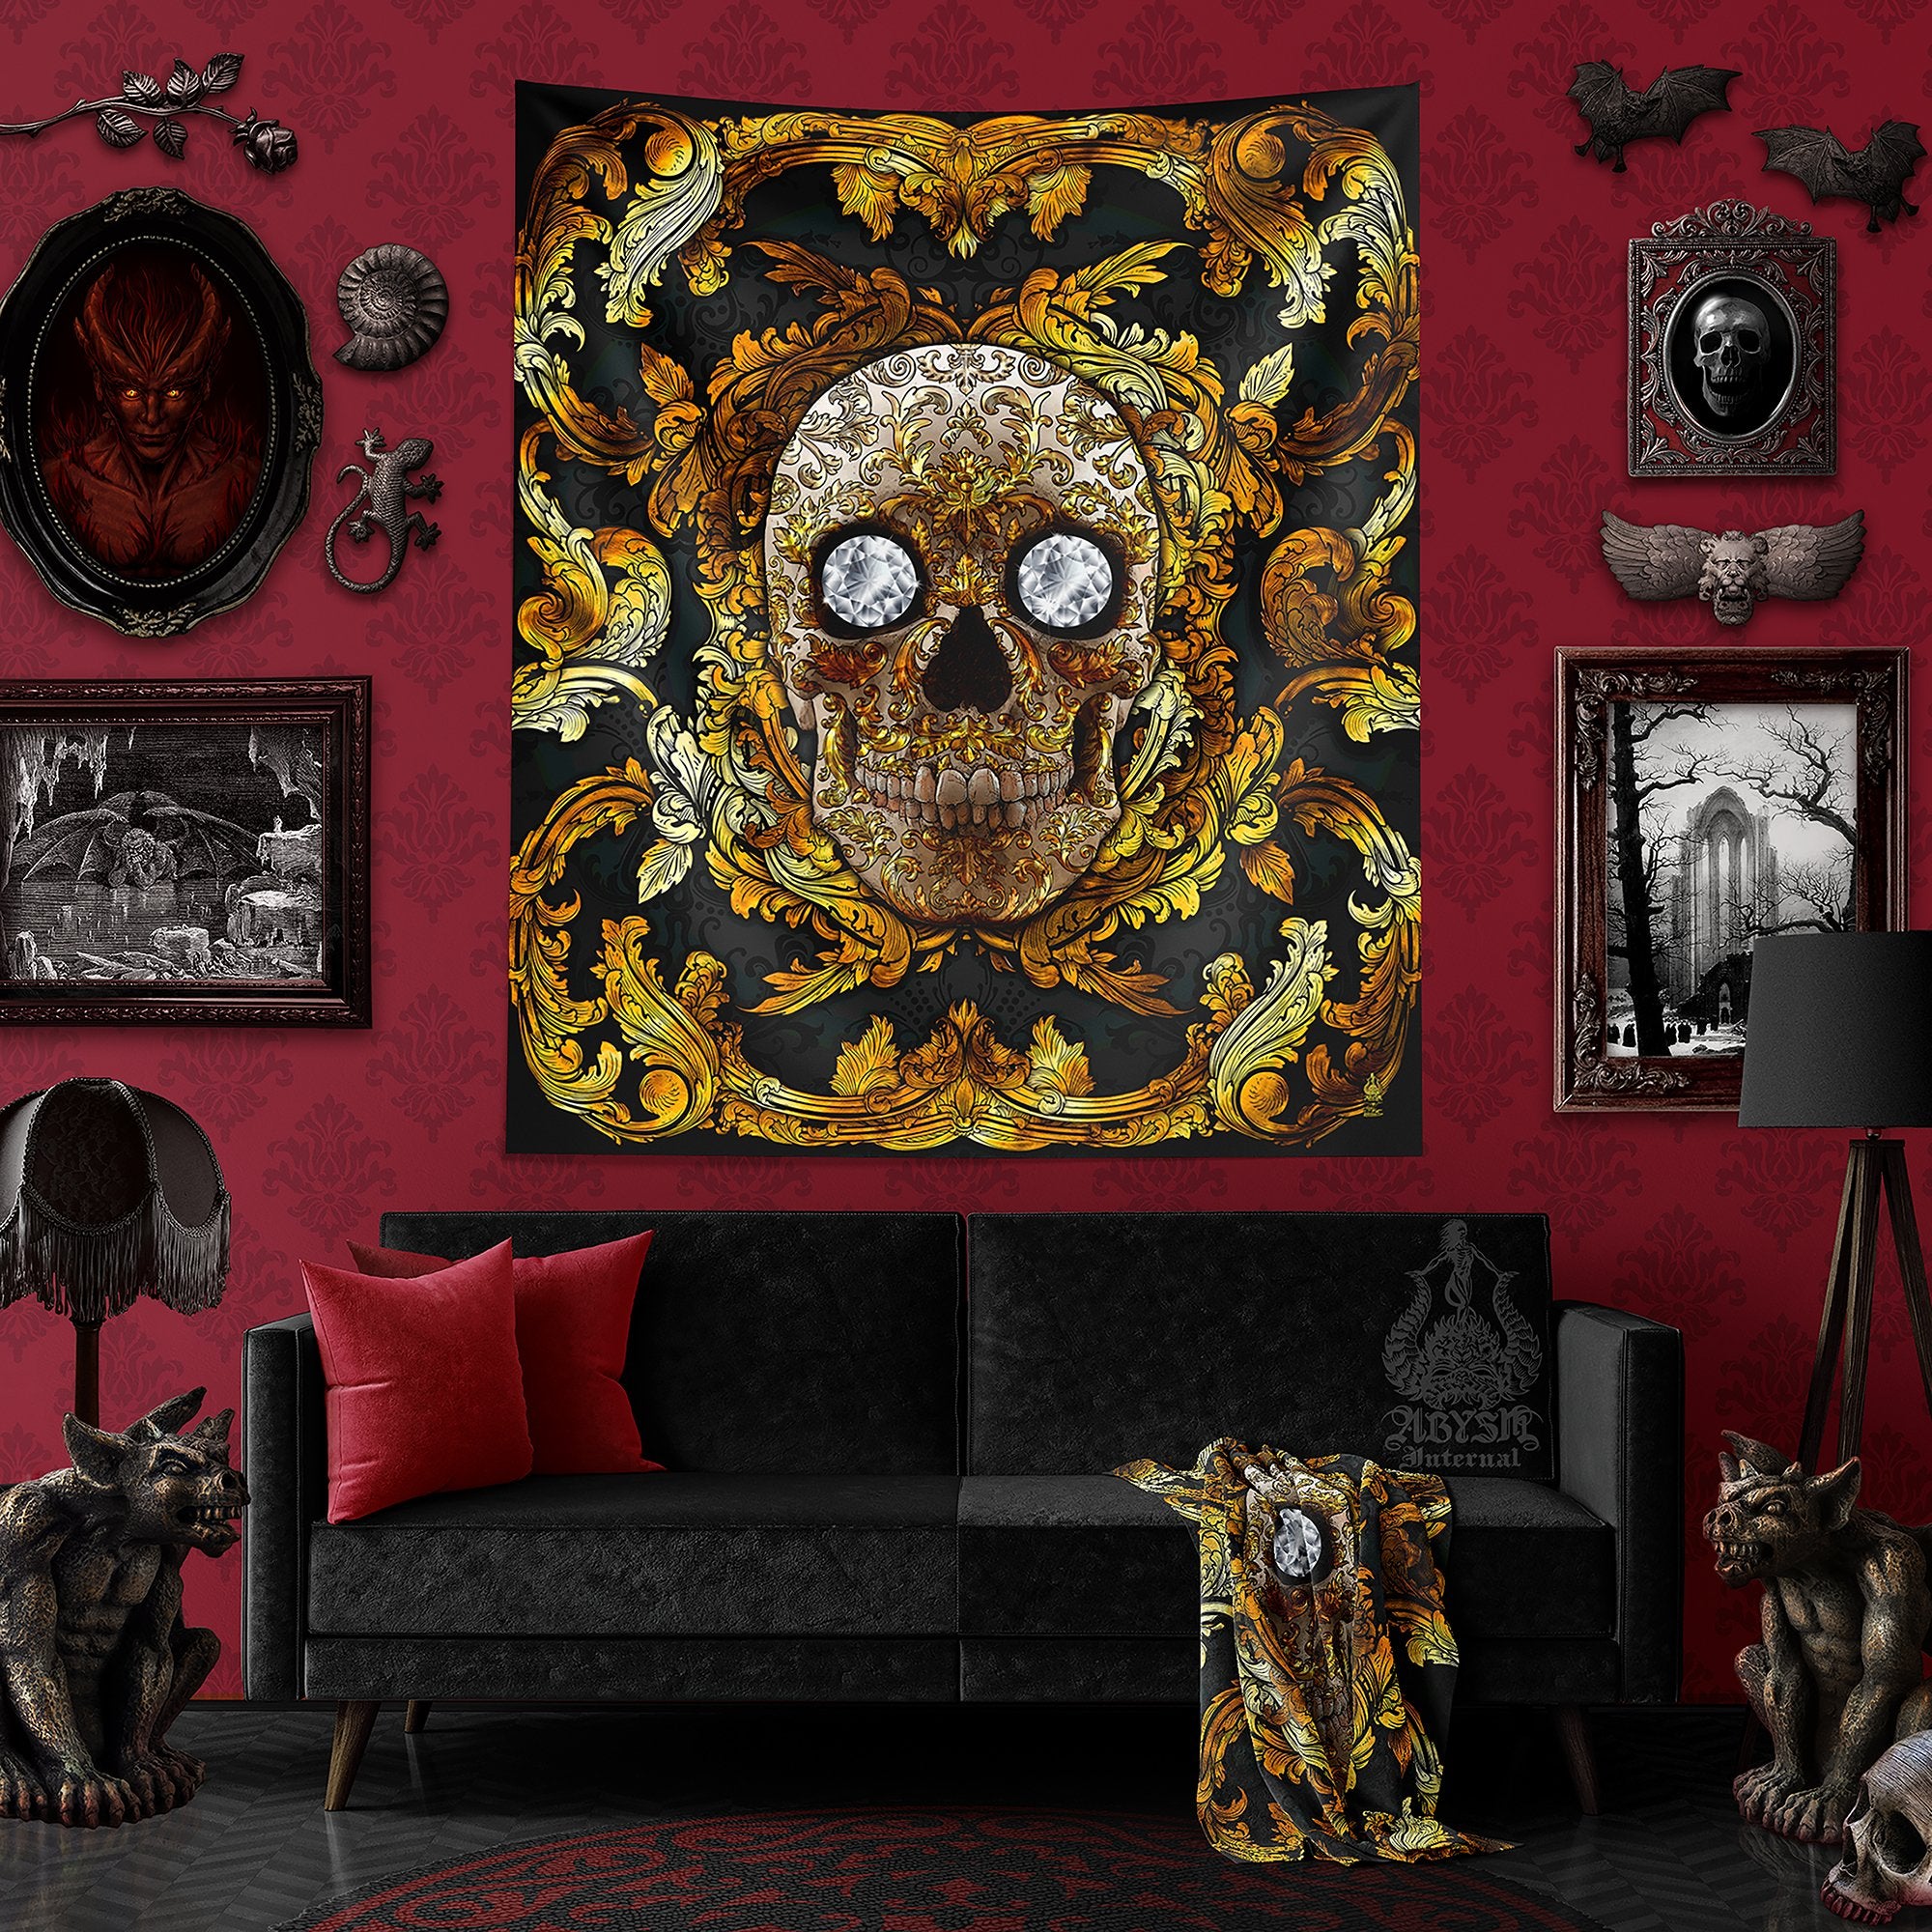 Gold Skull Tapestry, Macabre Wall Hanging, Goth Home Decor, Vertical Art Print - Red Roses and Diamonds, 2 versions - Abysm Internal